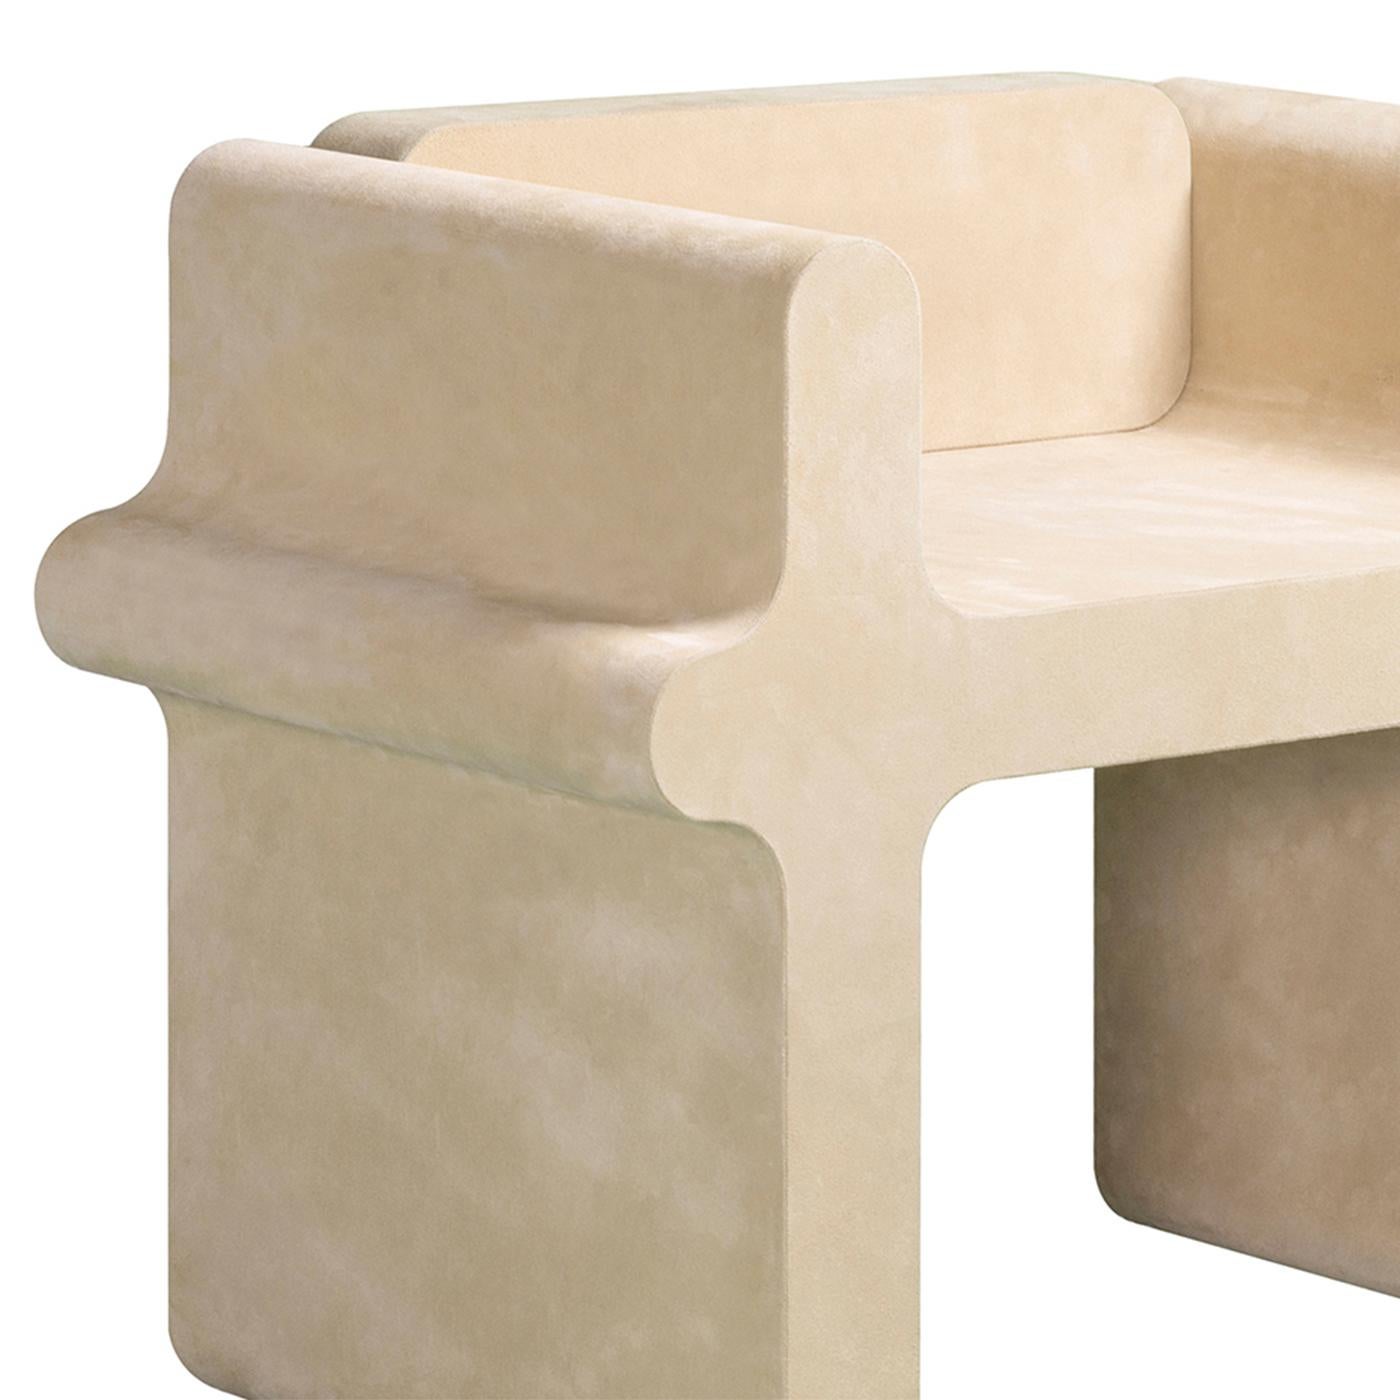 Chair Liguria Suede with structure in solid wood and 
covered with suede genuine leather in beige finish.
Also available with other leather finish on request.